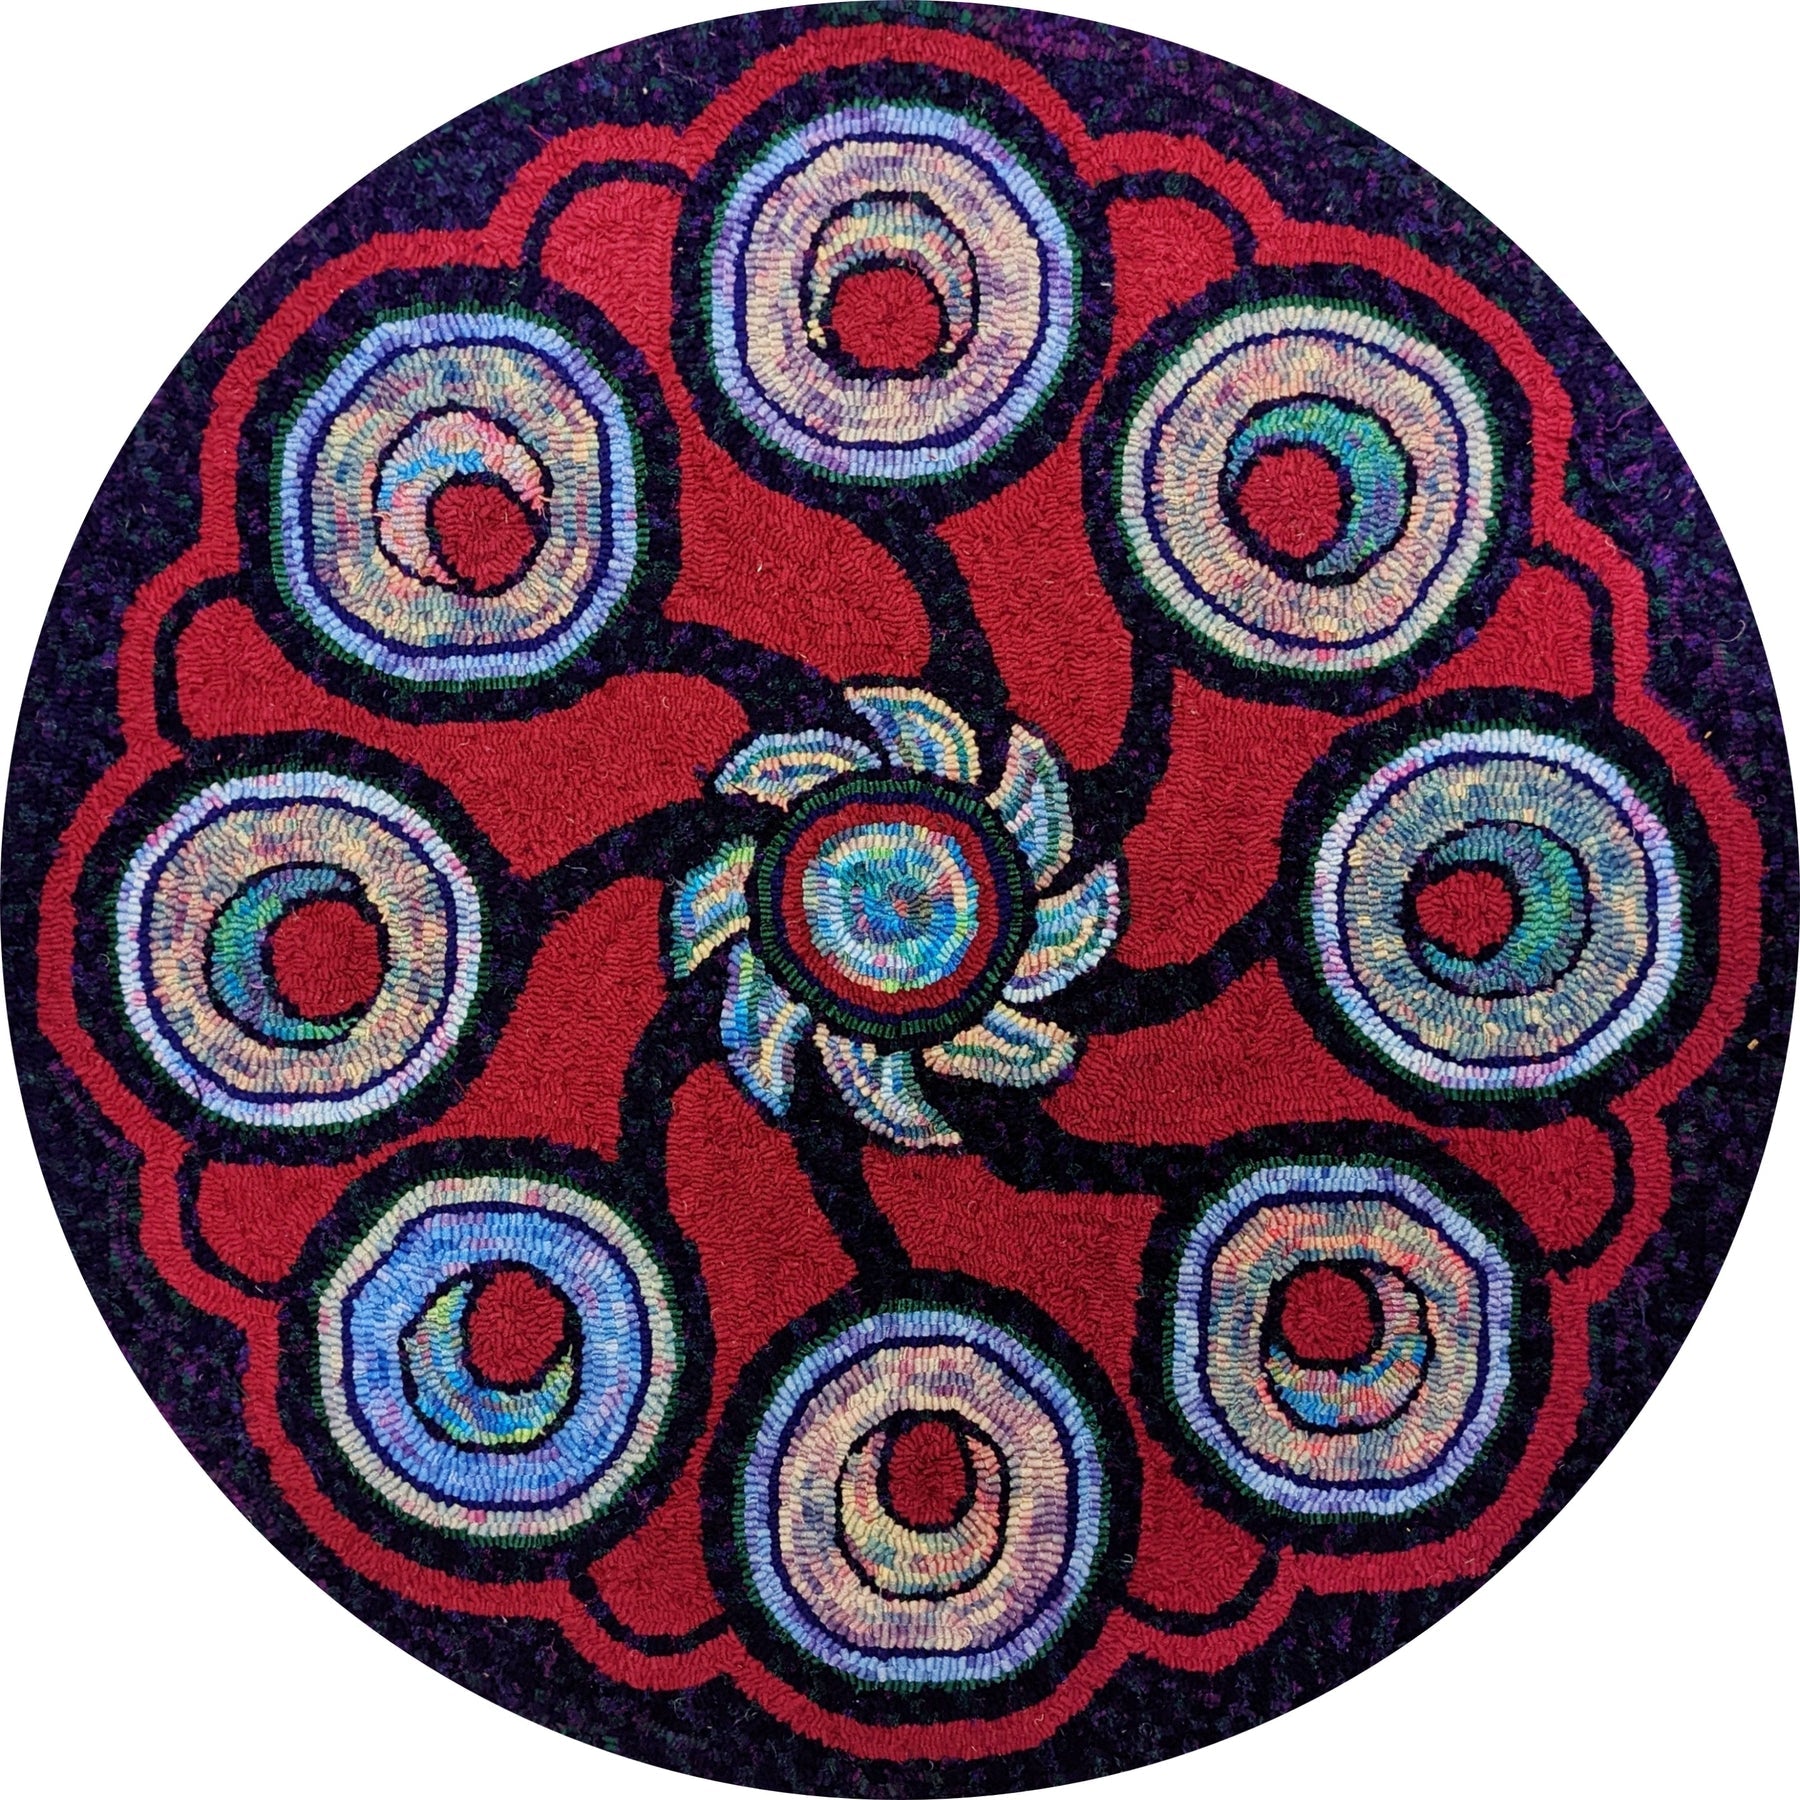 Circles Within Circles, rug hooked by Liz Crouch